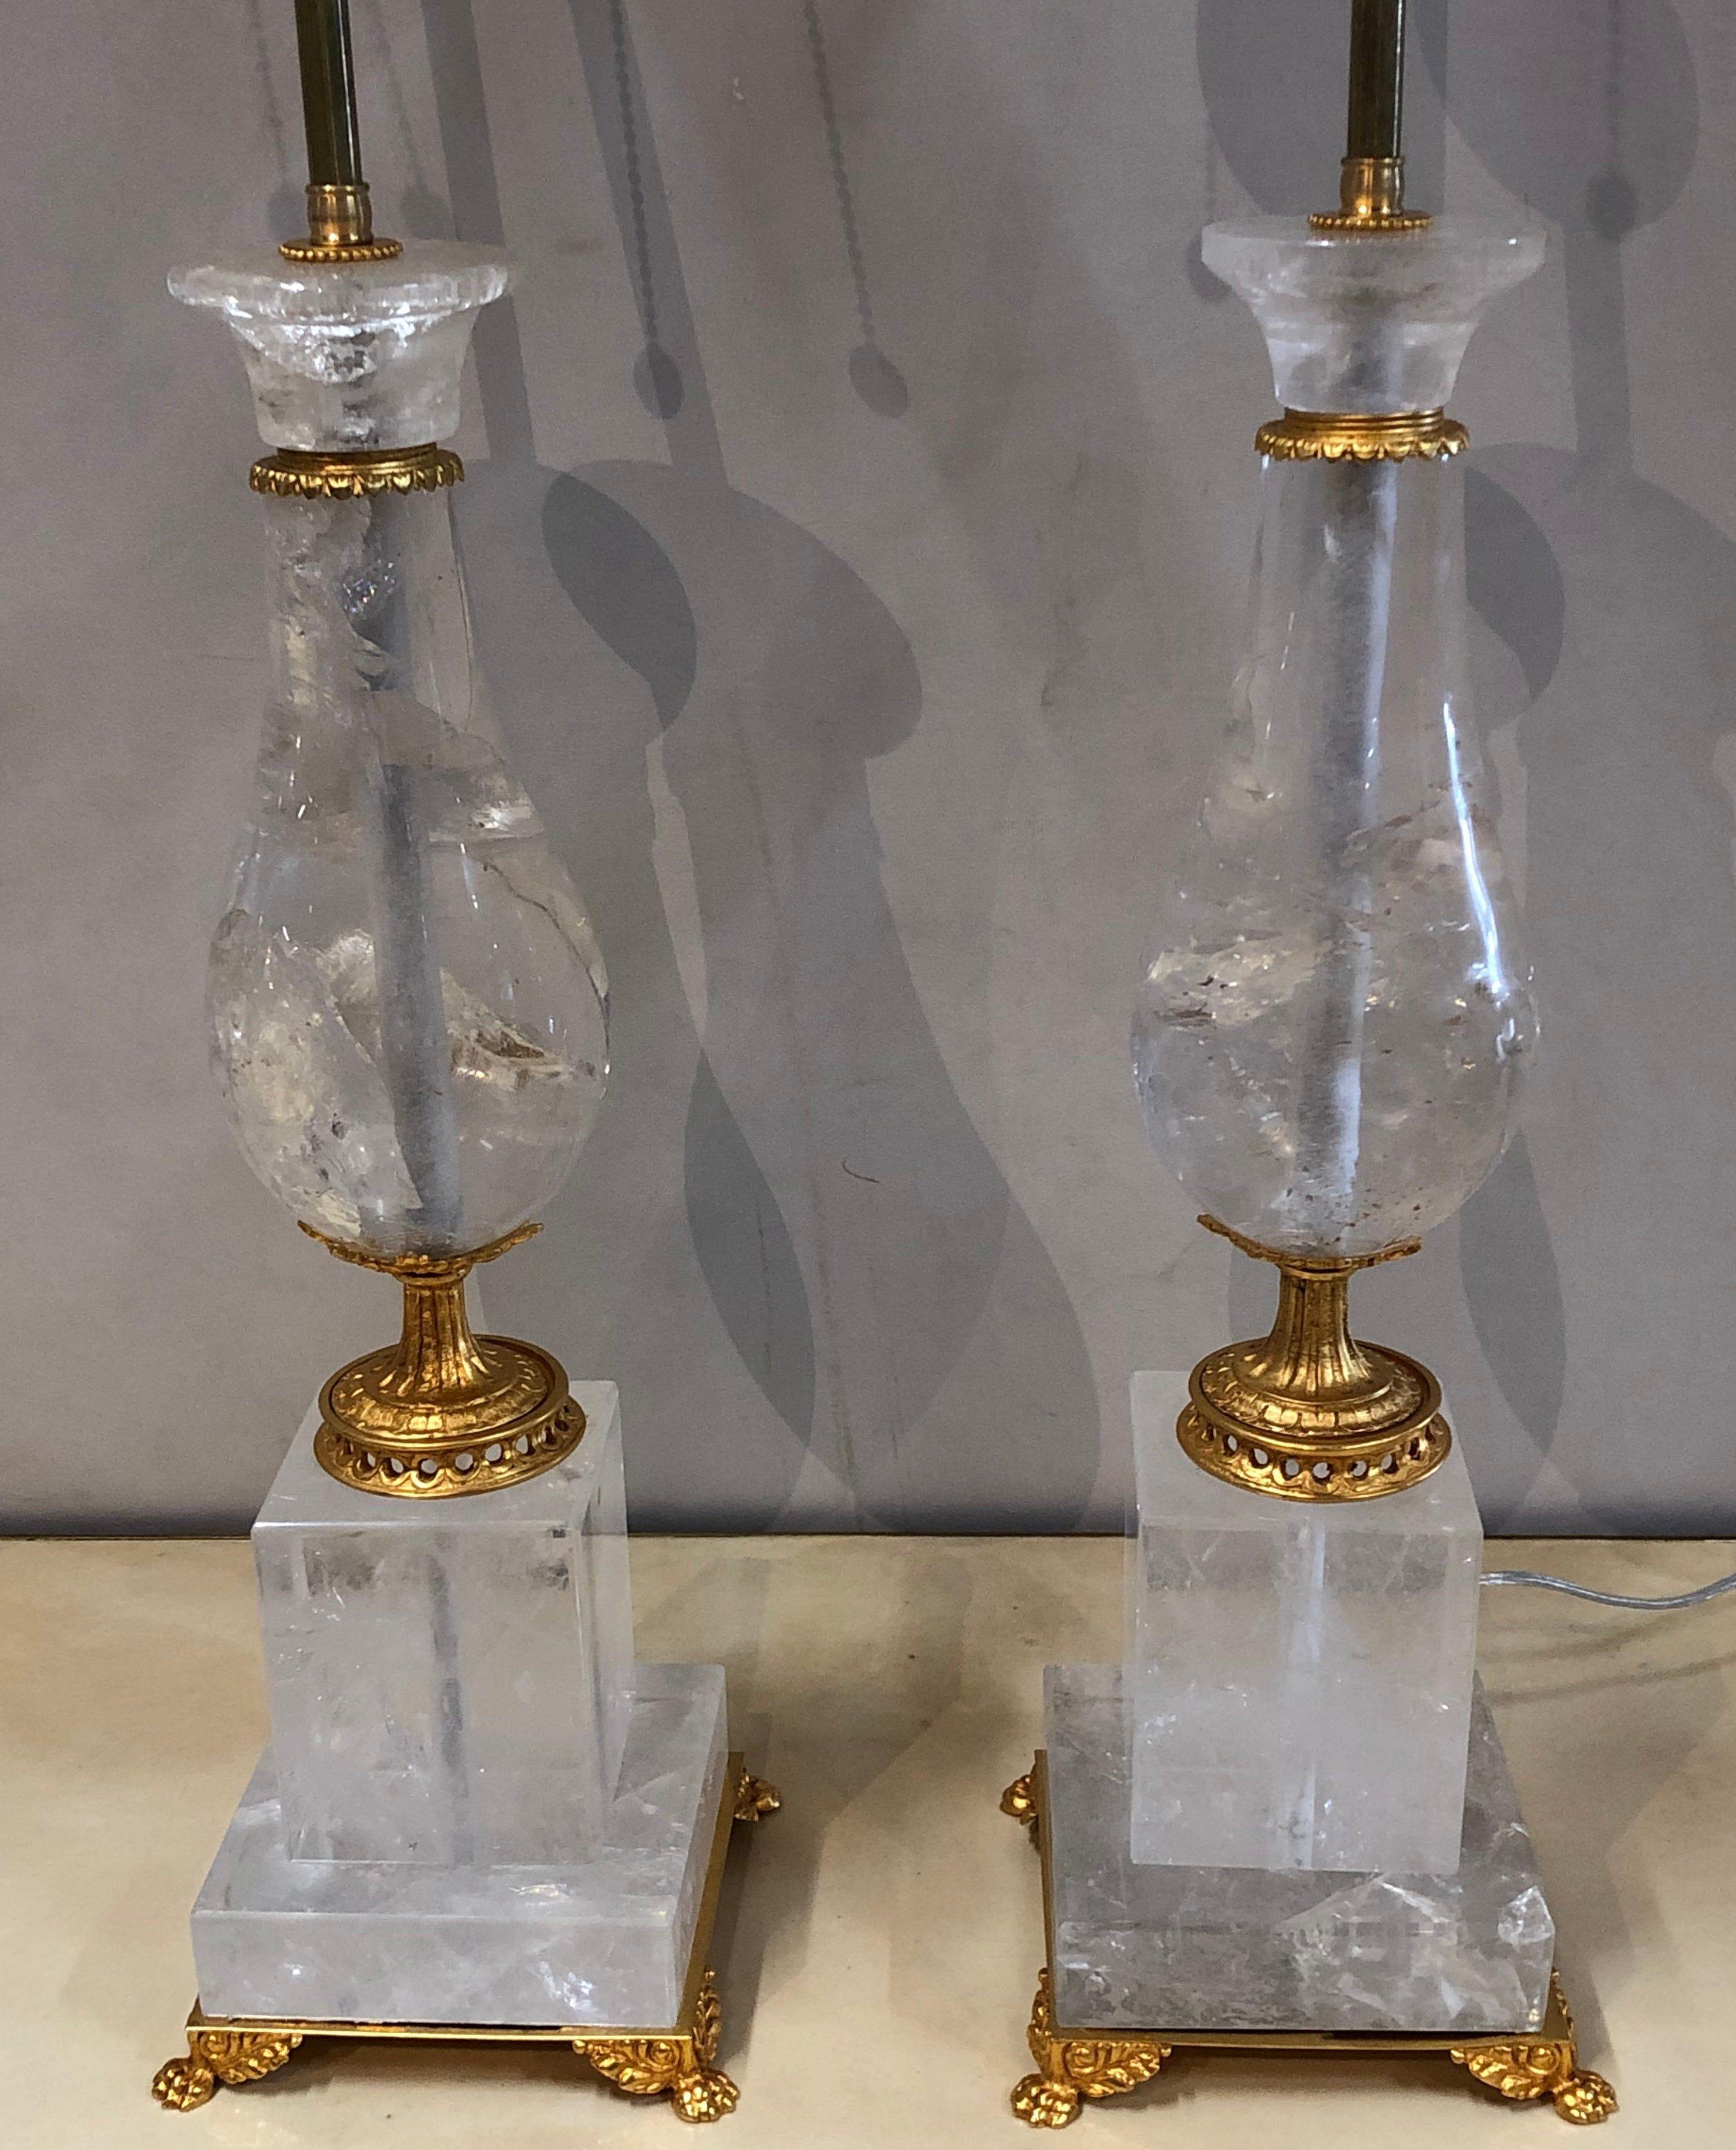 A pair of Art Deco style large rock crystal and brass urn on base form table lamps. The large urn itself measures 19.5 inches high. The gilt metal claw feet with winged sides supporting a column form pedestal base leading to a large column form urn